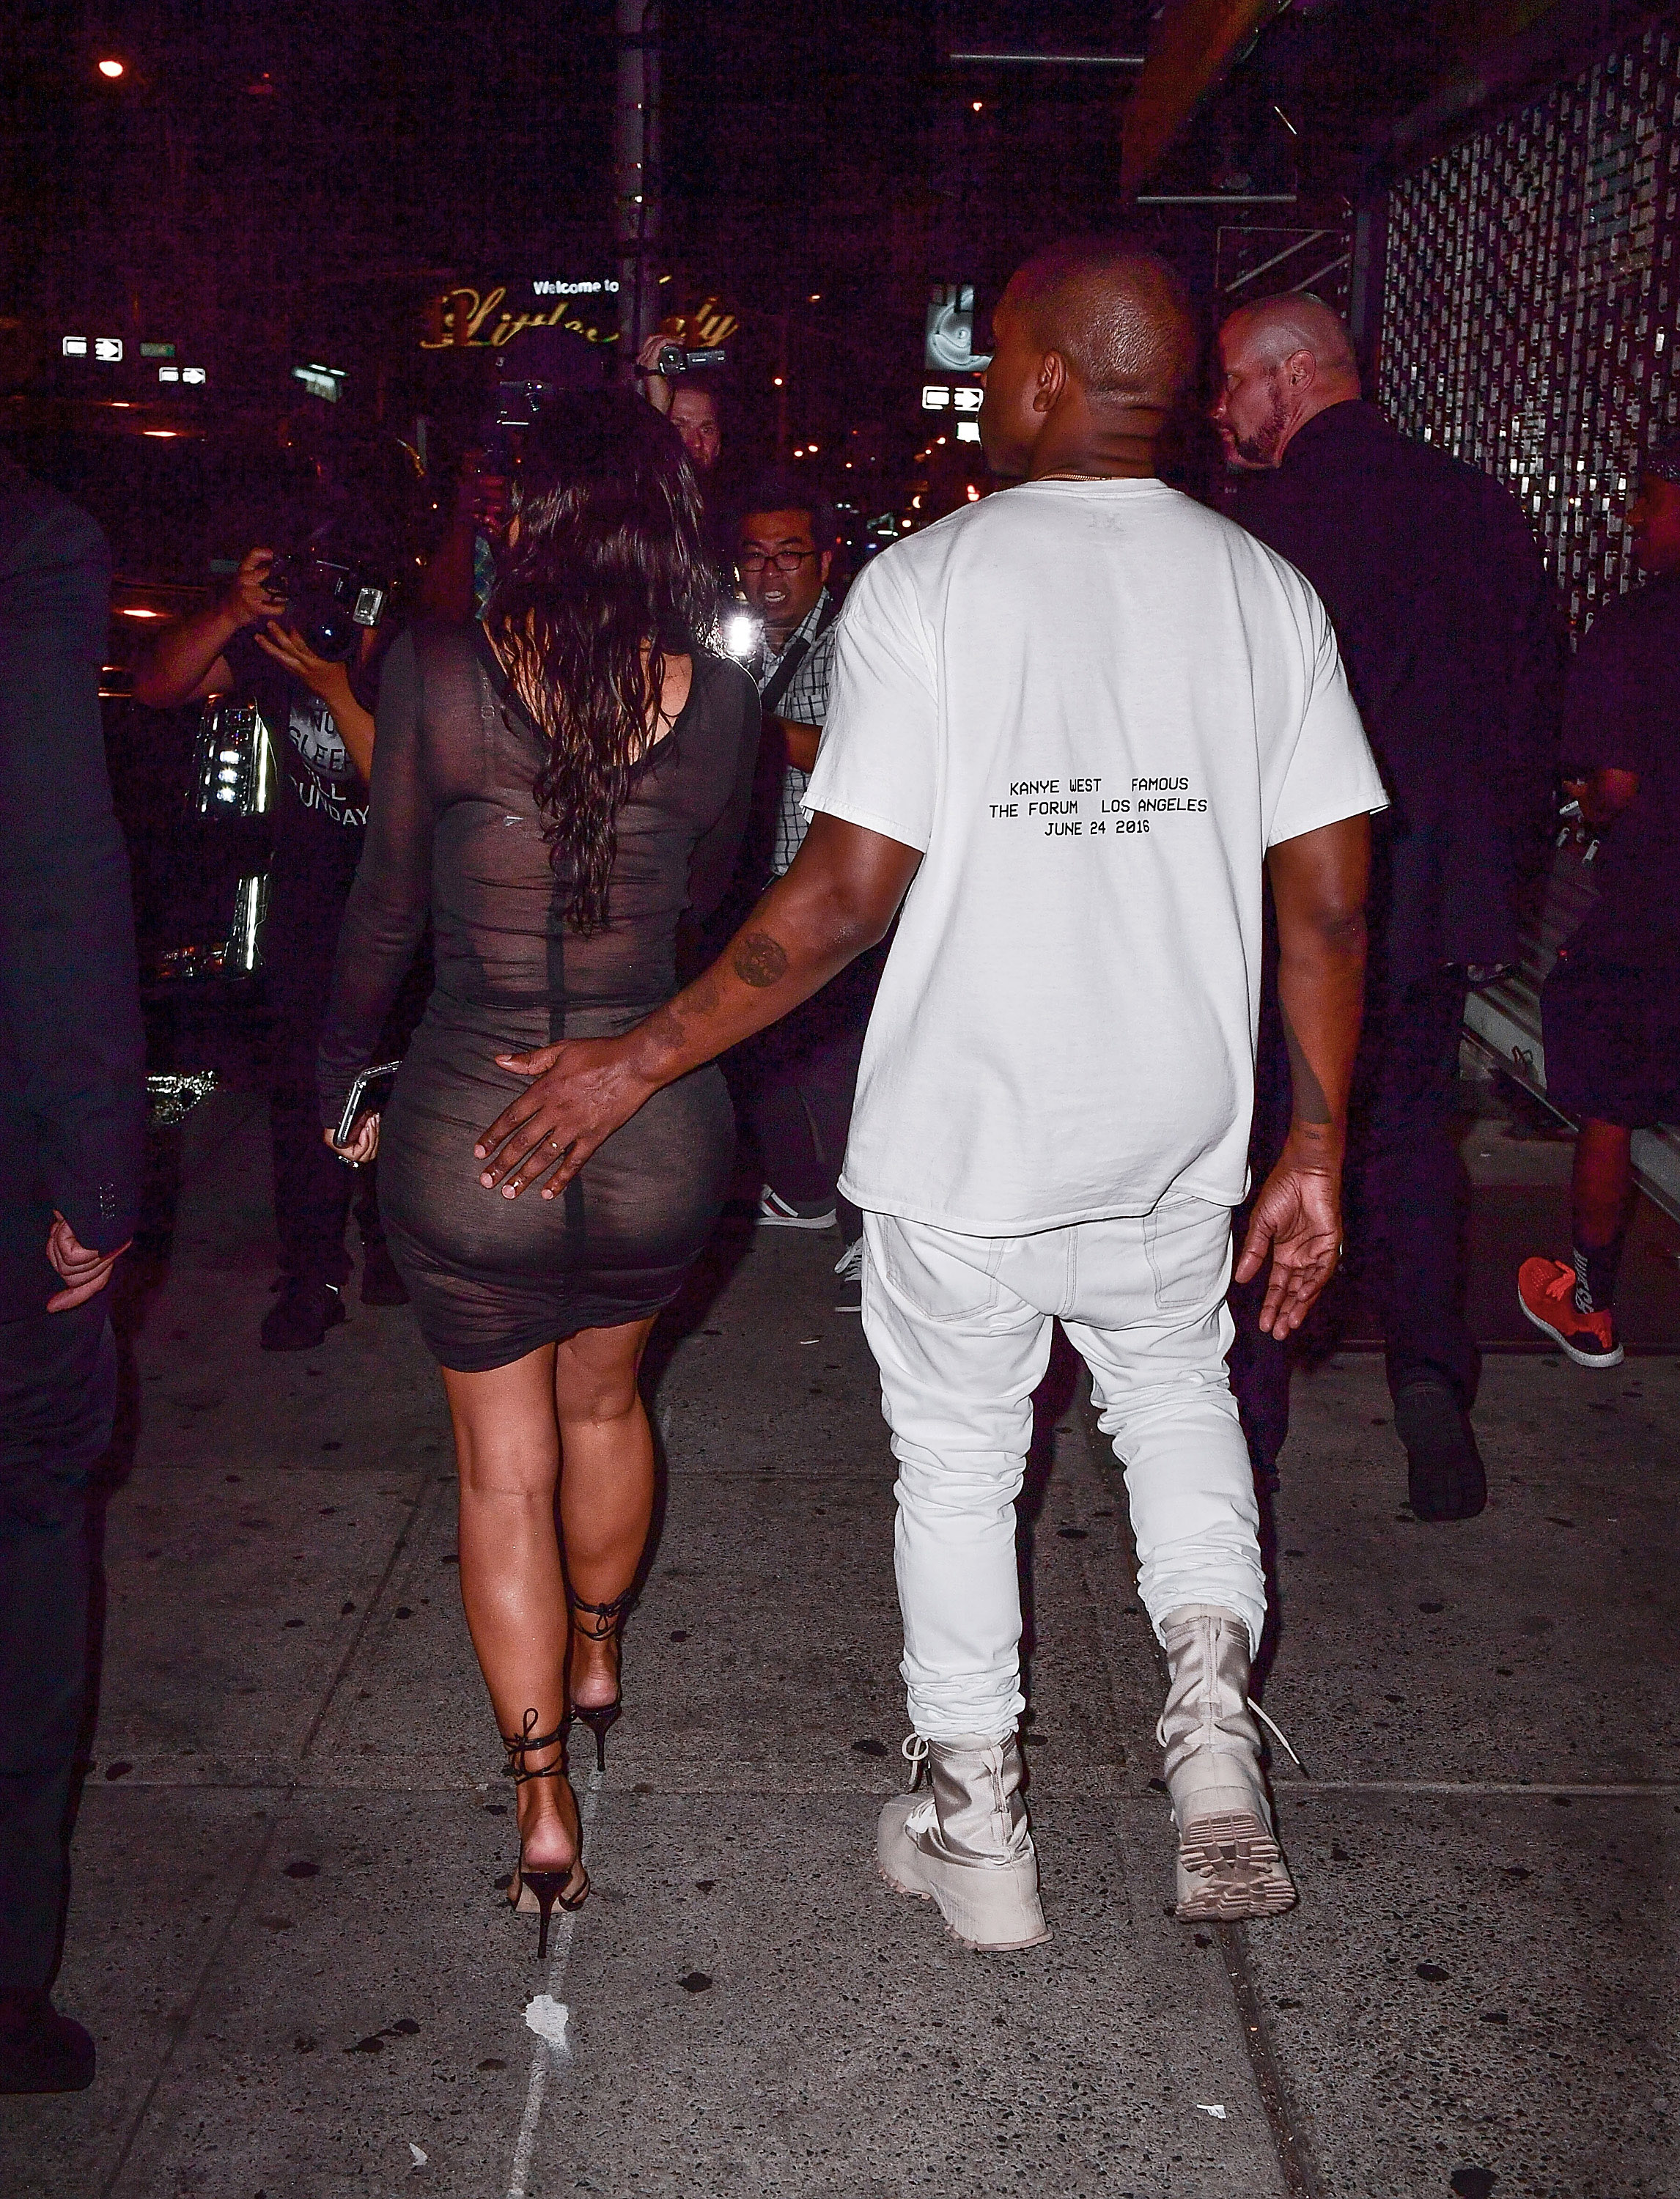 NEW YORK, NY - AUGUST 28:  Kanye West and Kim Kardashian leave their 2016 MTV Video Music Awards After Party at Pasquale Jones on August 28, 2016 in New York City.  (Photo by James Devaney/GC Images)